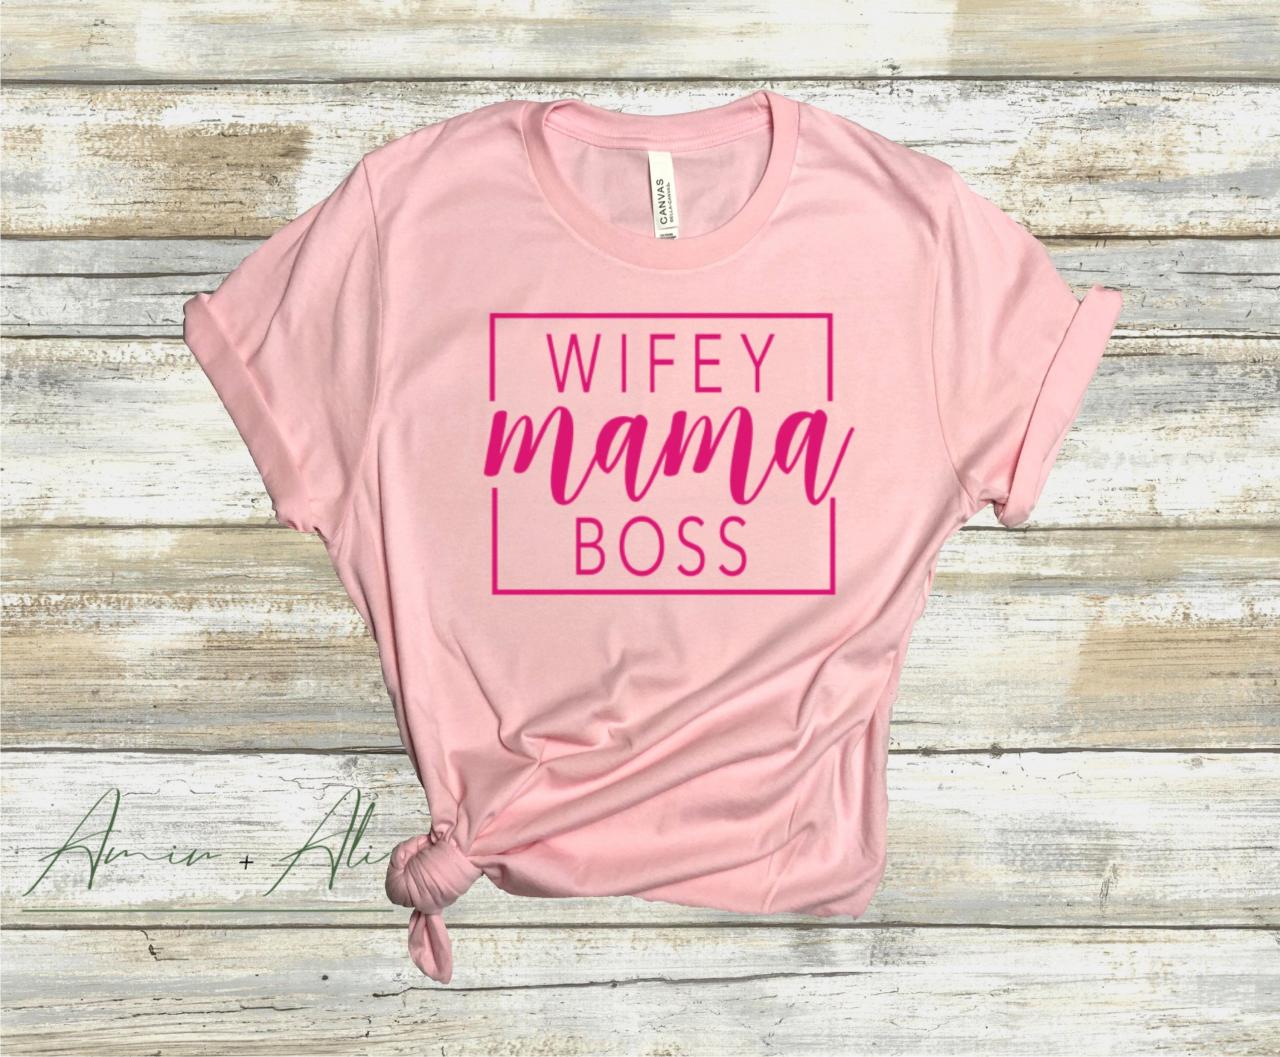 Wifey Mama Boss, wifey shirt, mom boss gift, wife gift from husband, gift for boss, shirt for wife, small business owner shirt, gift for mom